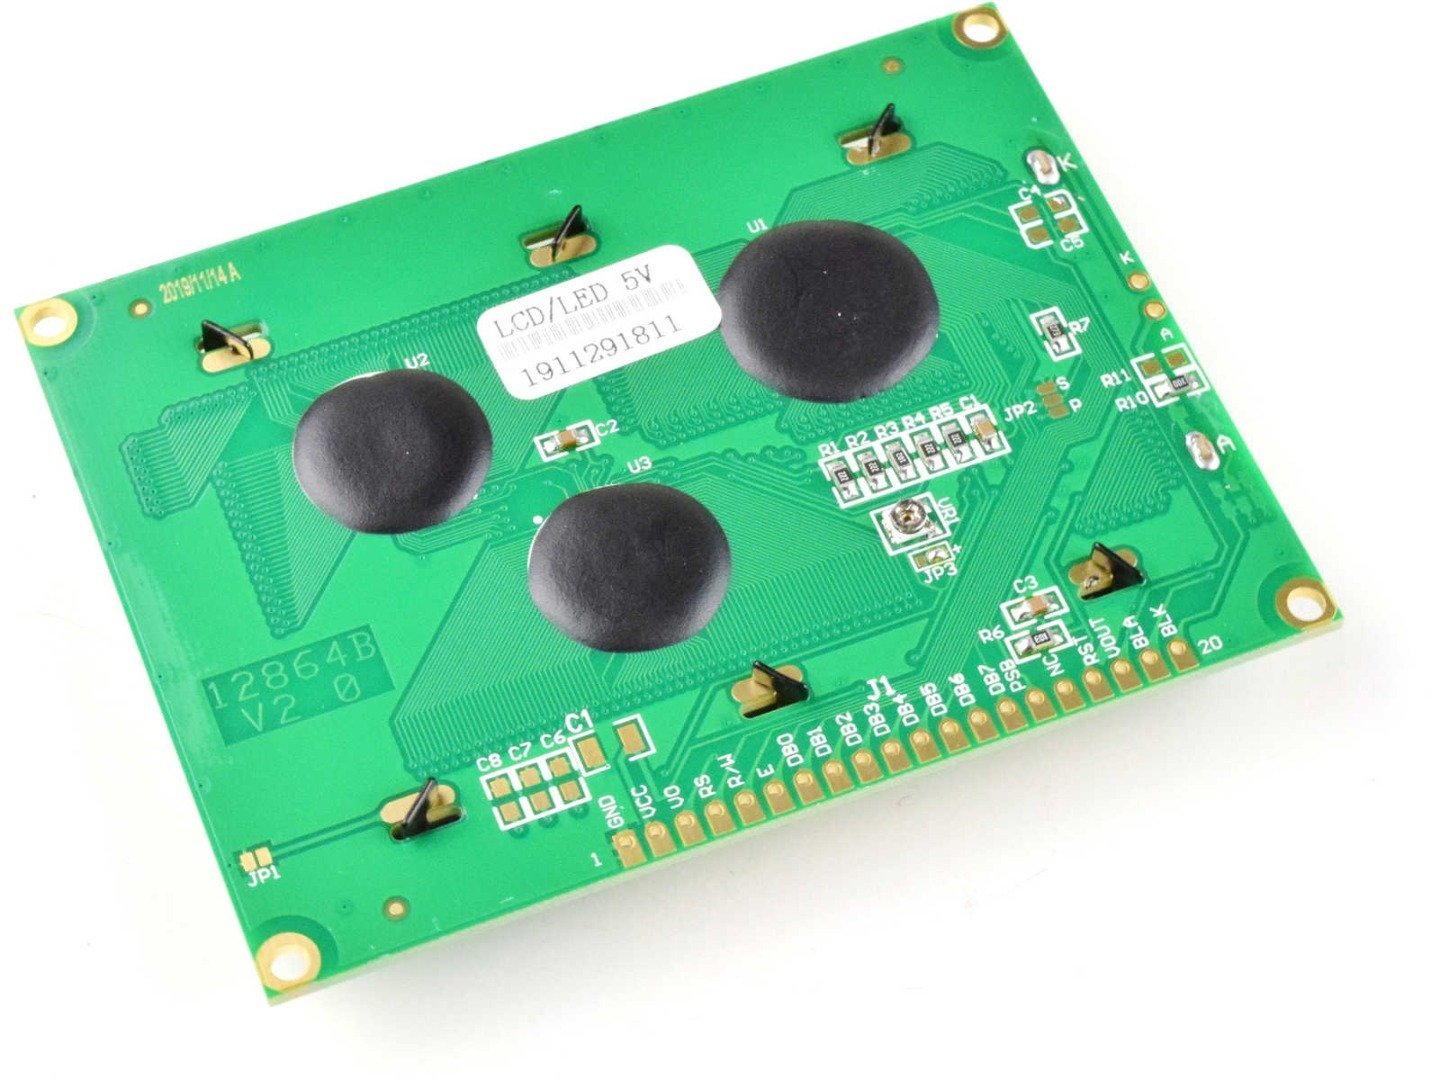 LCD12864 128×64 Graphic Display SPI, green-yellow, ST7920 7